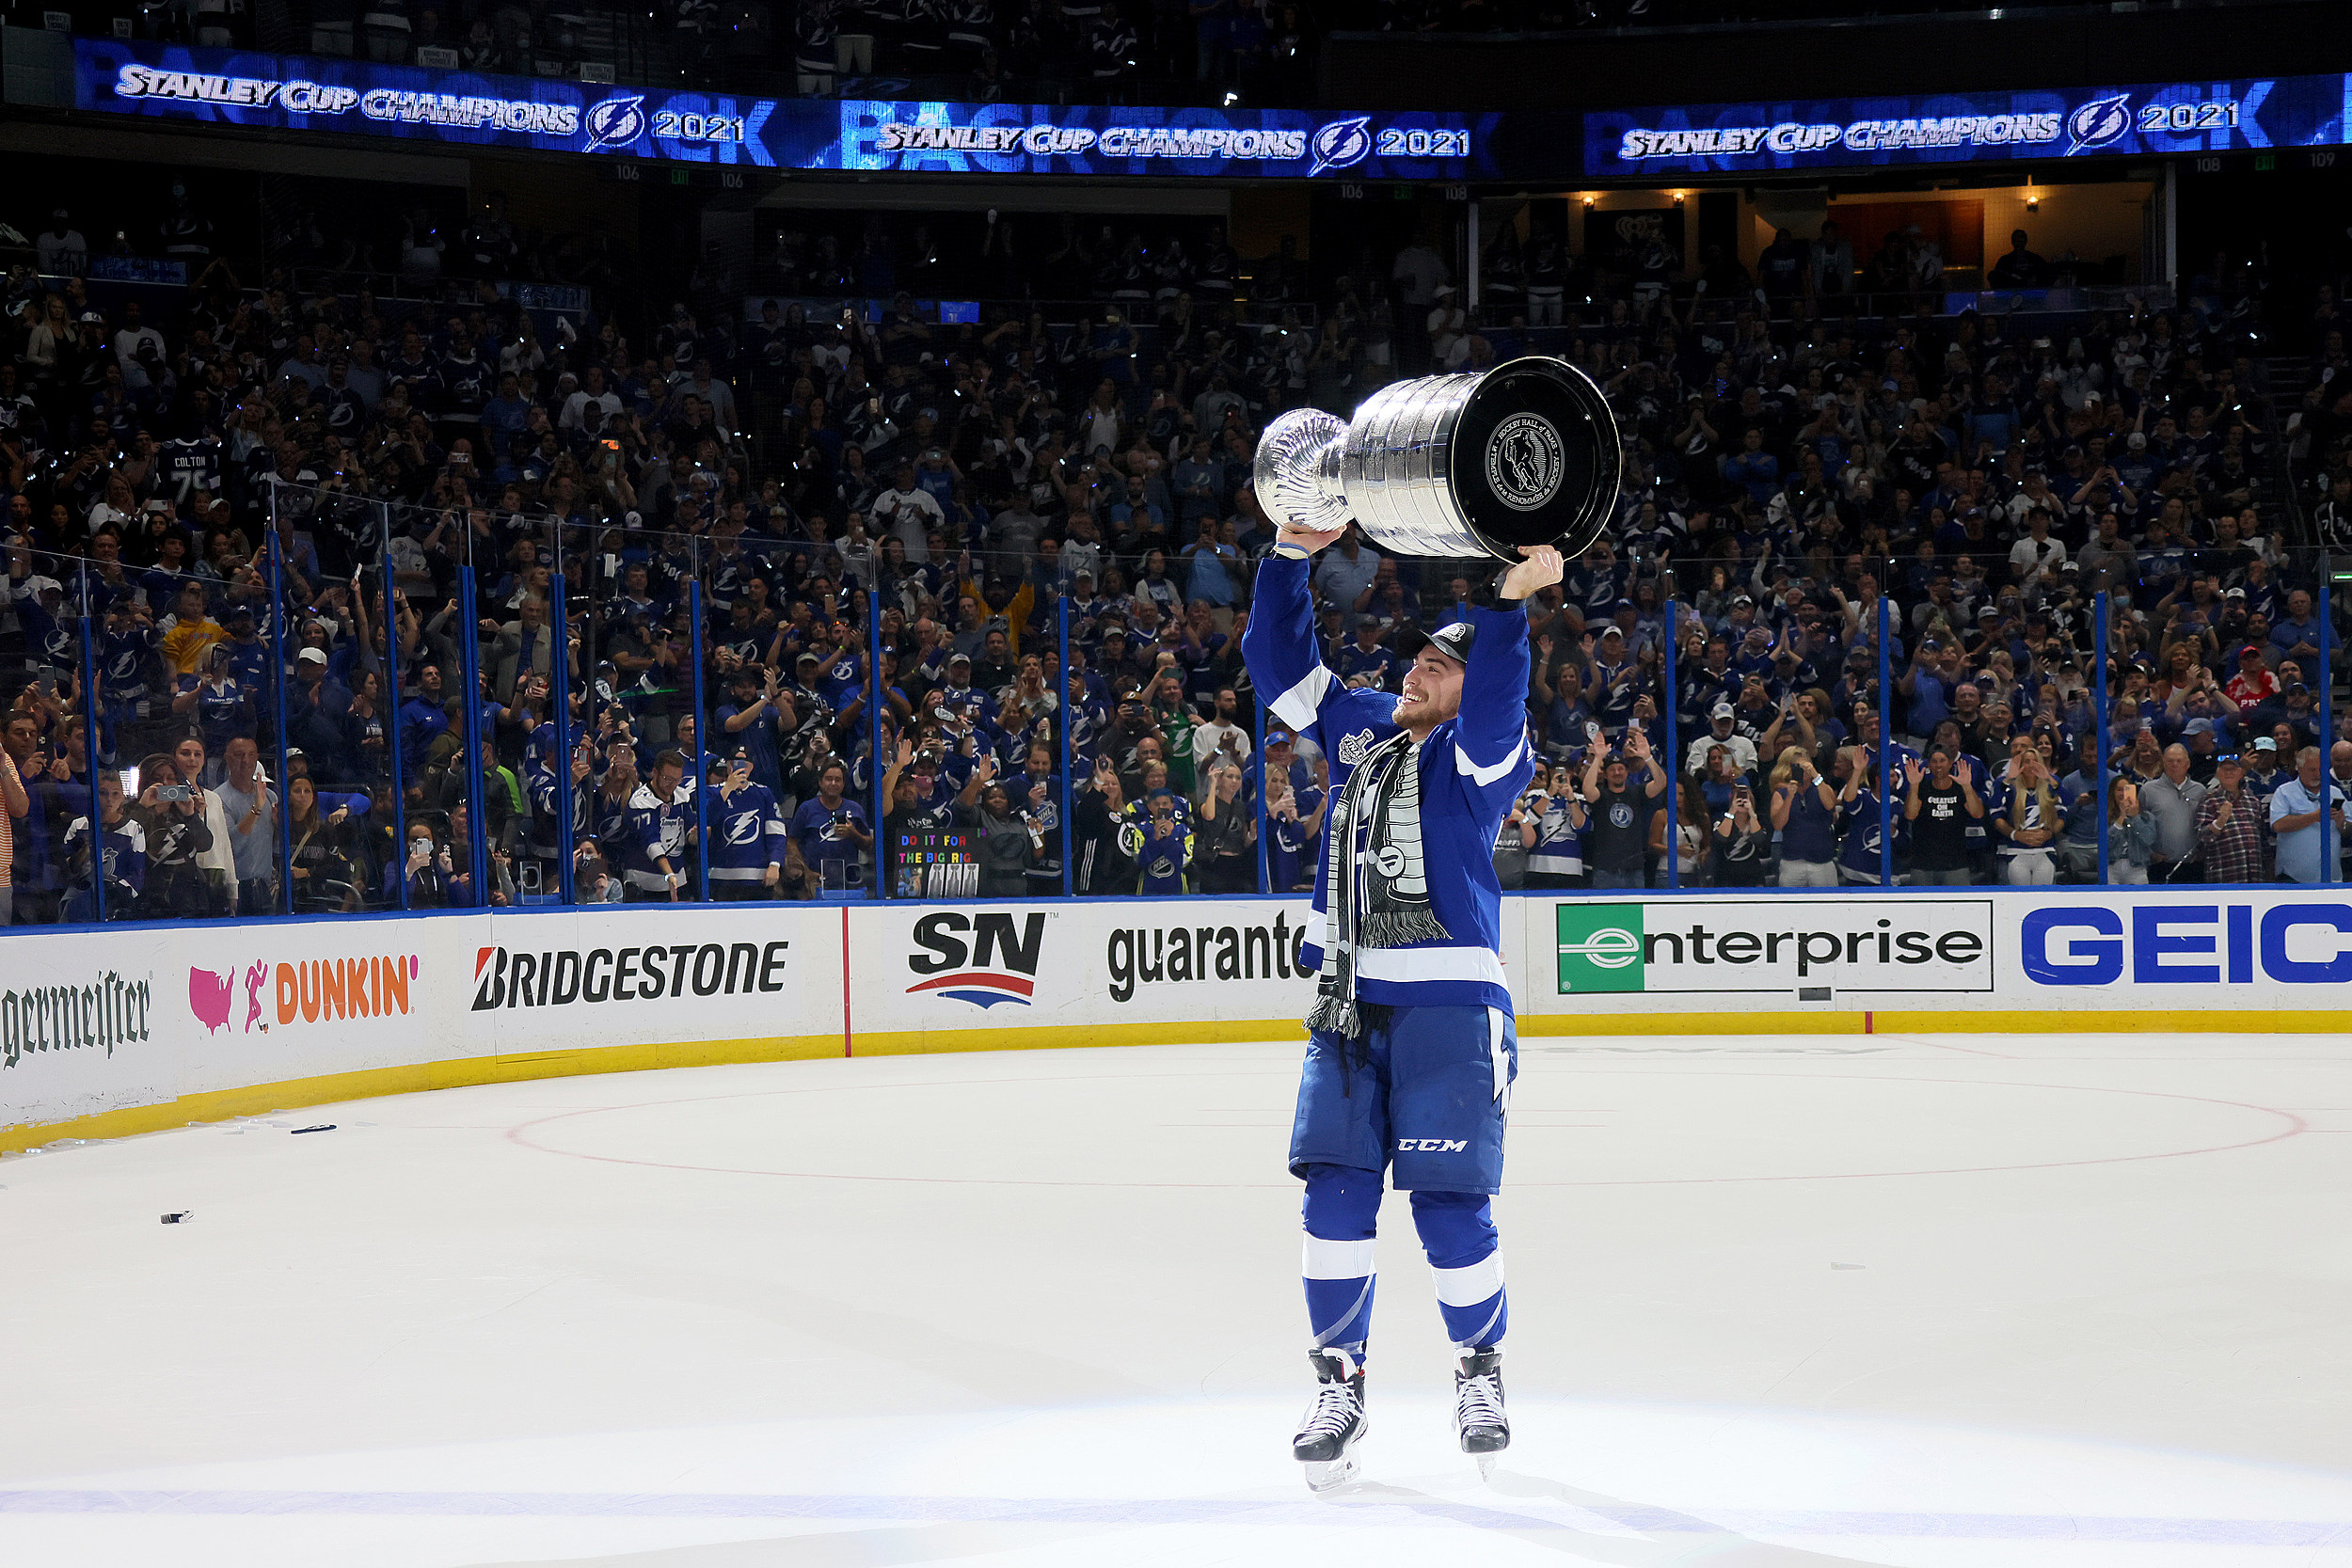 Lightning celebrate Stanley Cup win as part of 25th anniversary